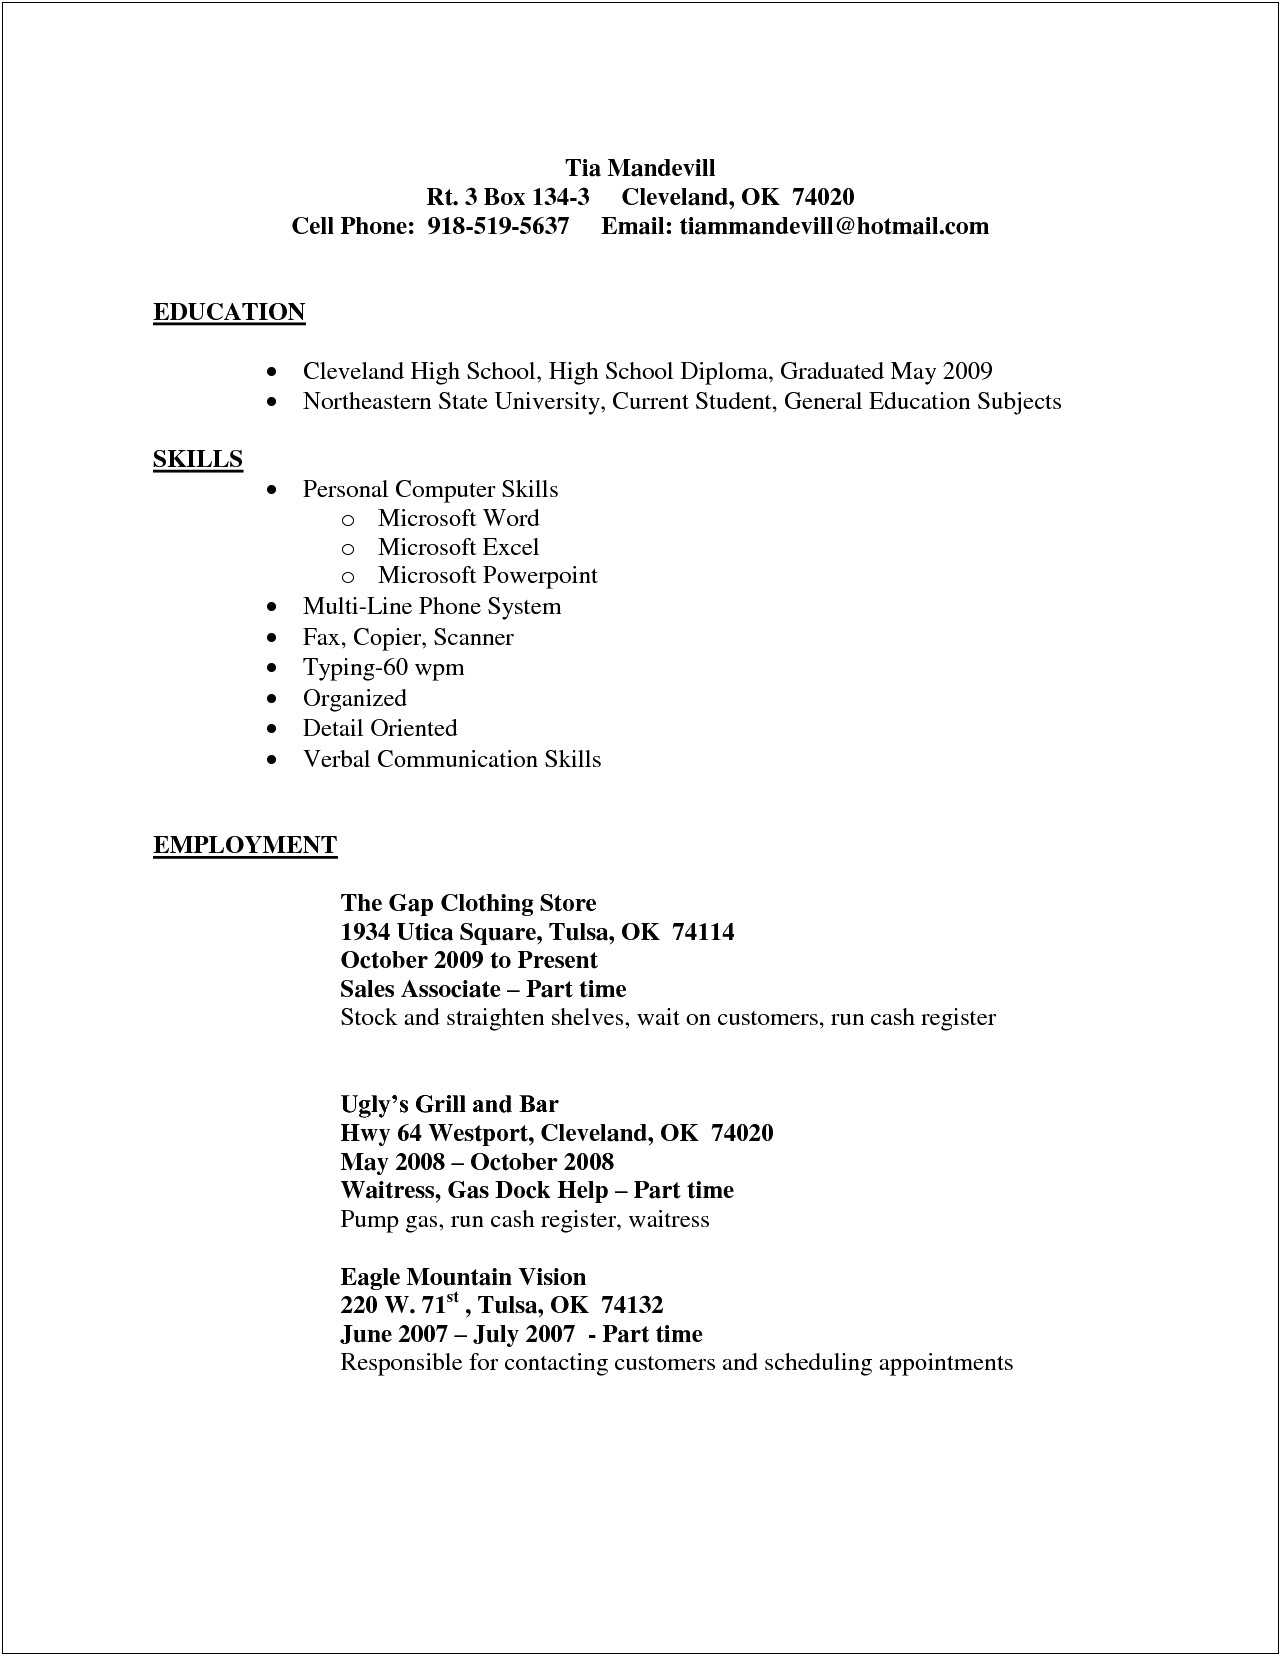 Skills For Retail Manager Resume Example